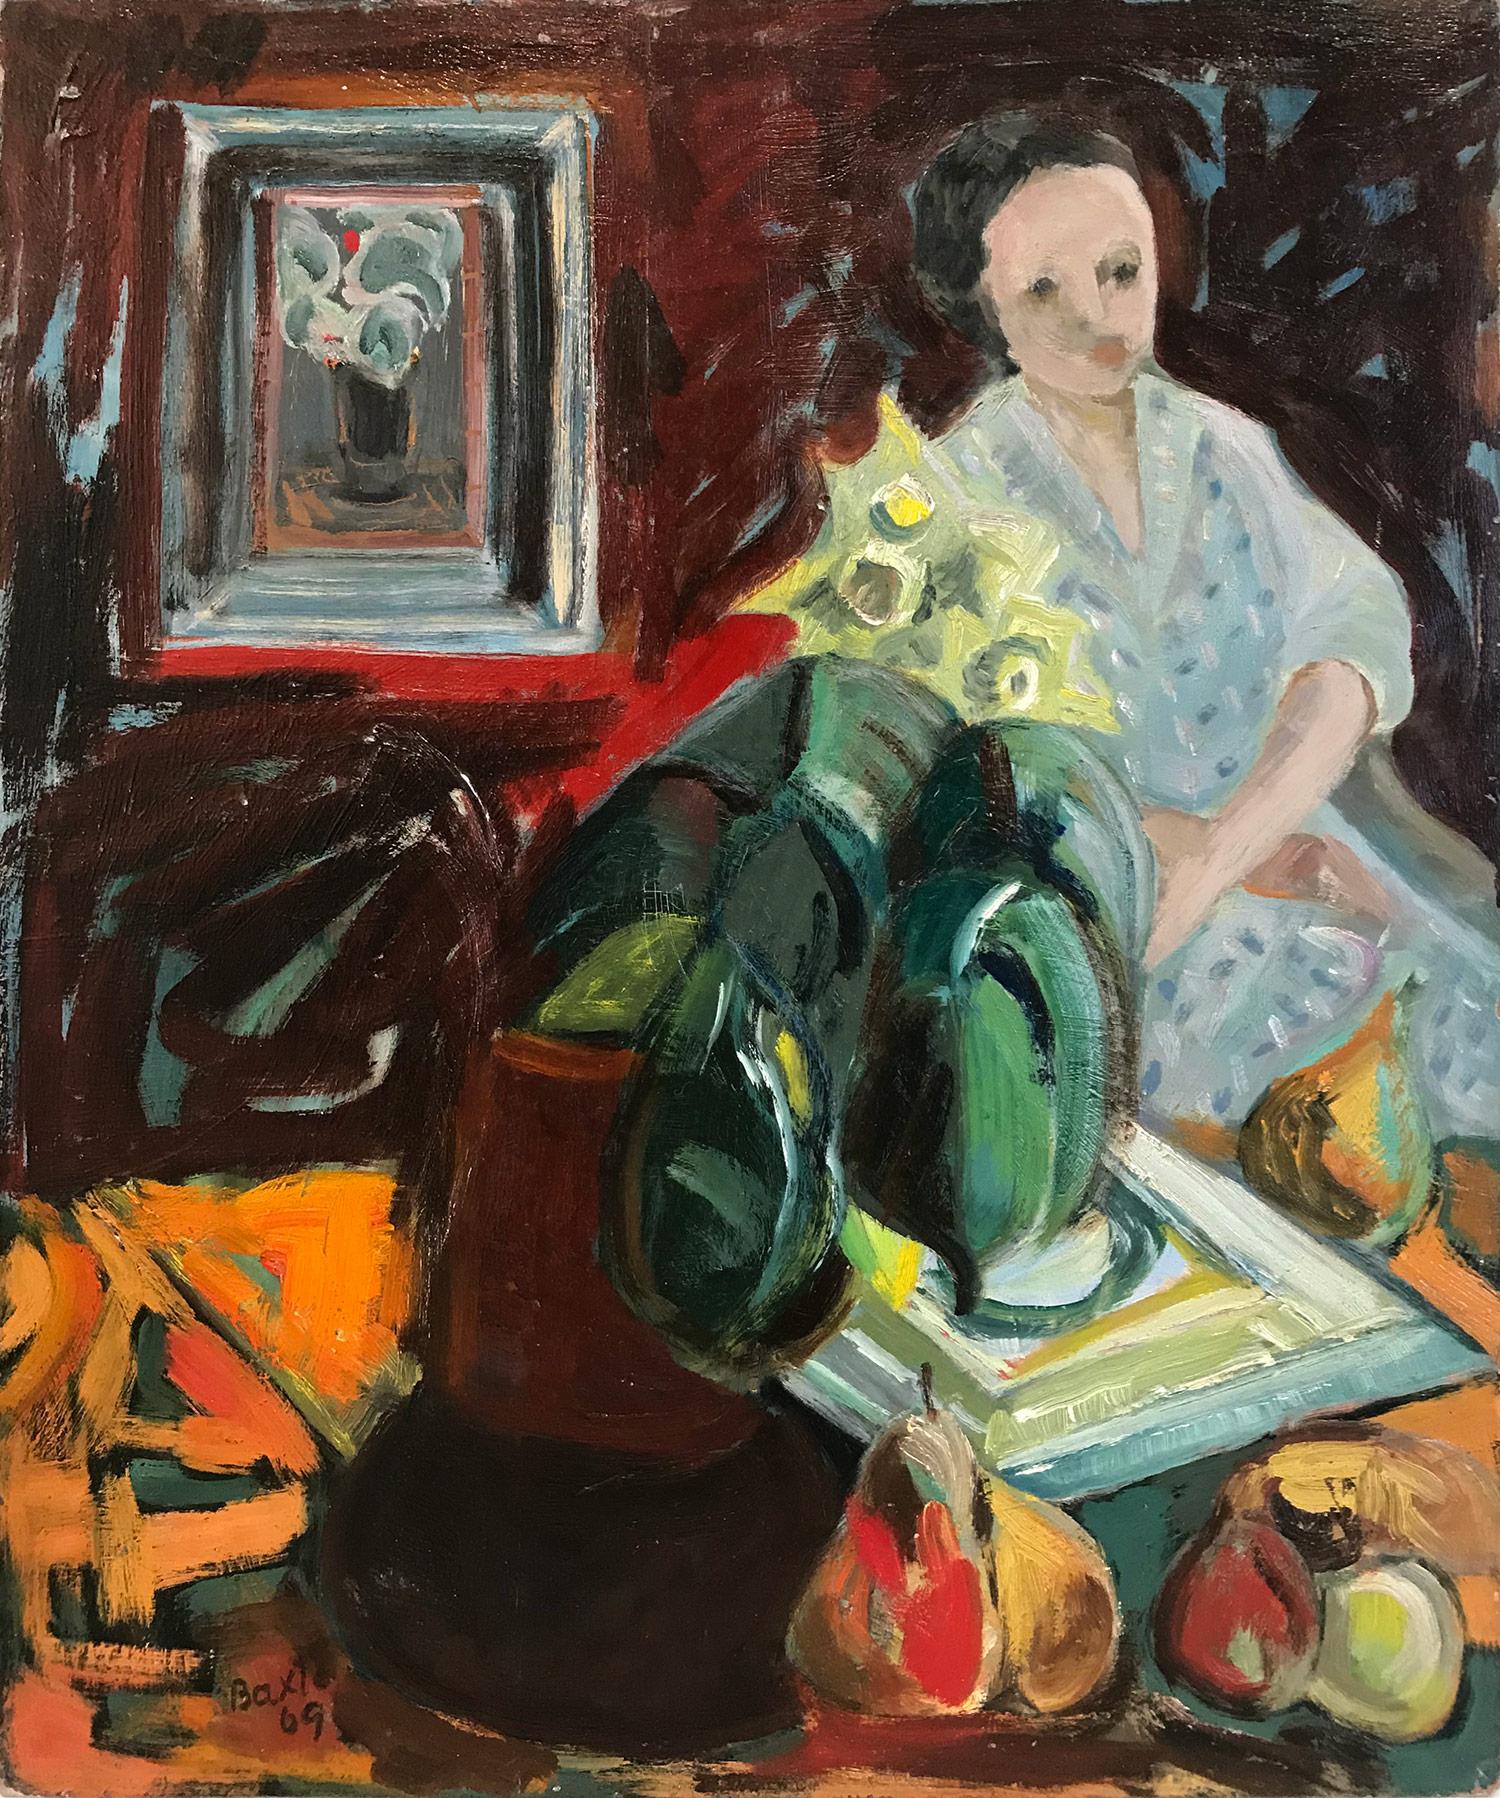 "Interior Scene with Figure" Expressionistic Style Oil Painting on Masonite